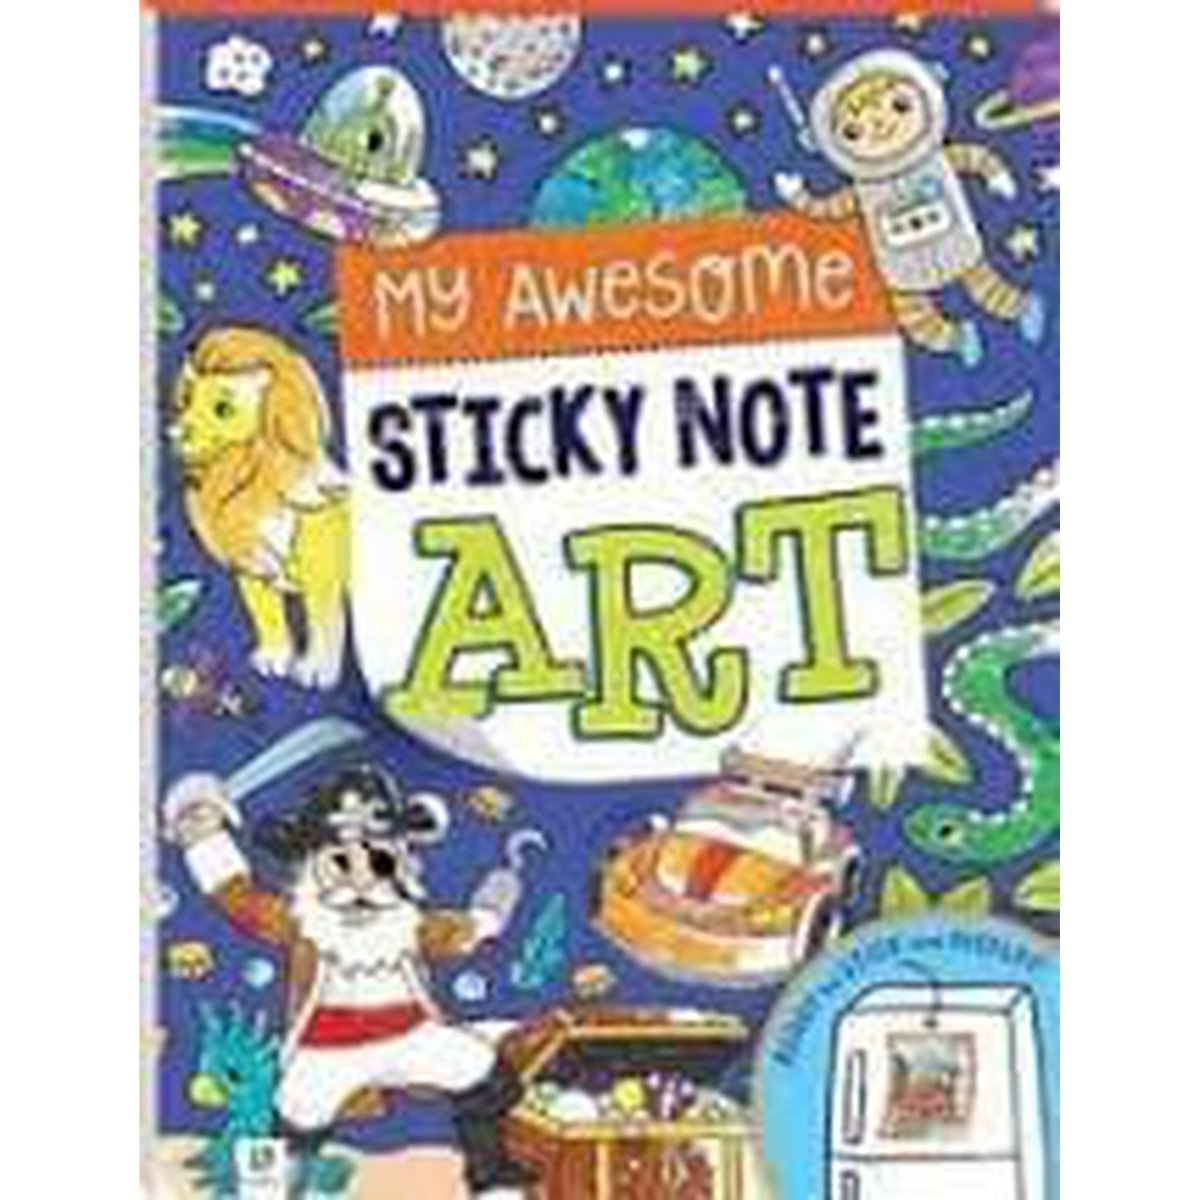 My Awesome Sticky Note Book - Kids Party Craft